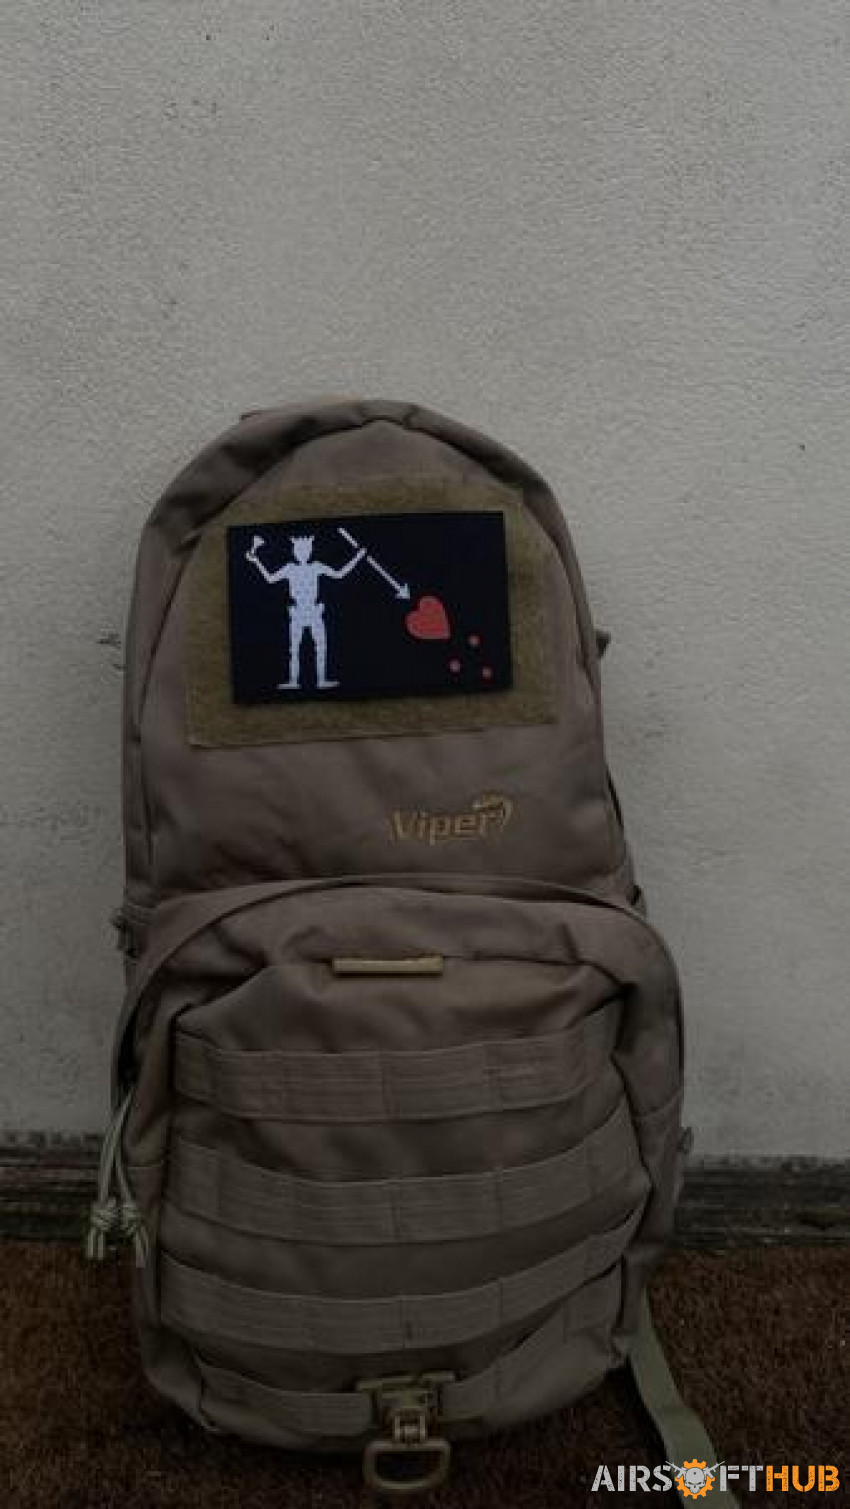 Viper tactical MOLLE backpack - Used airsoft equipment